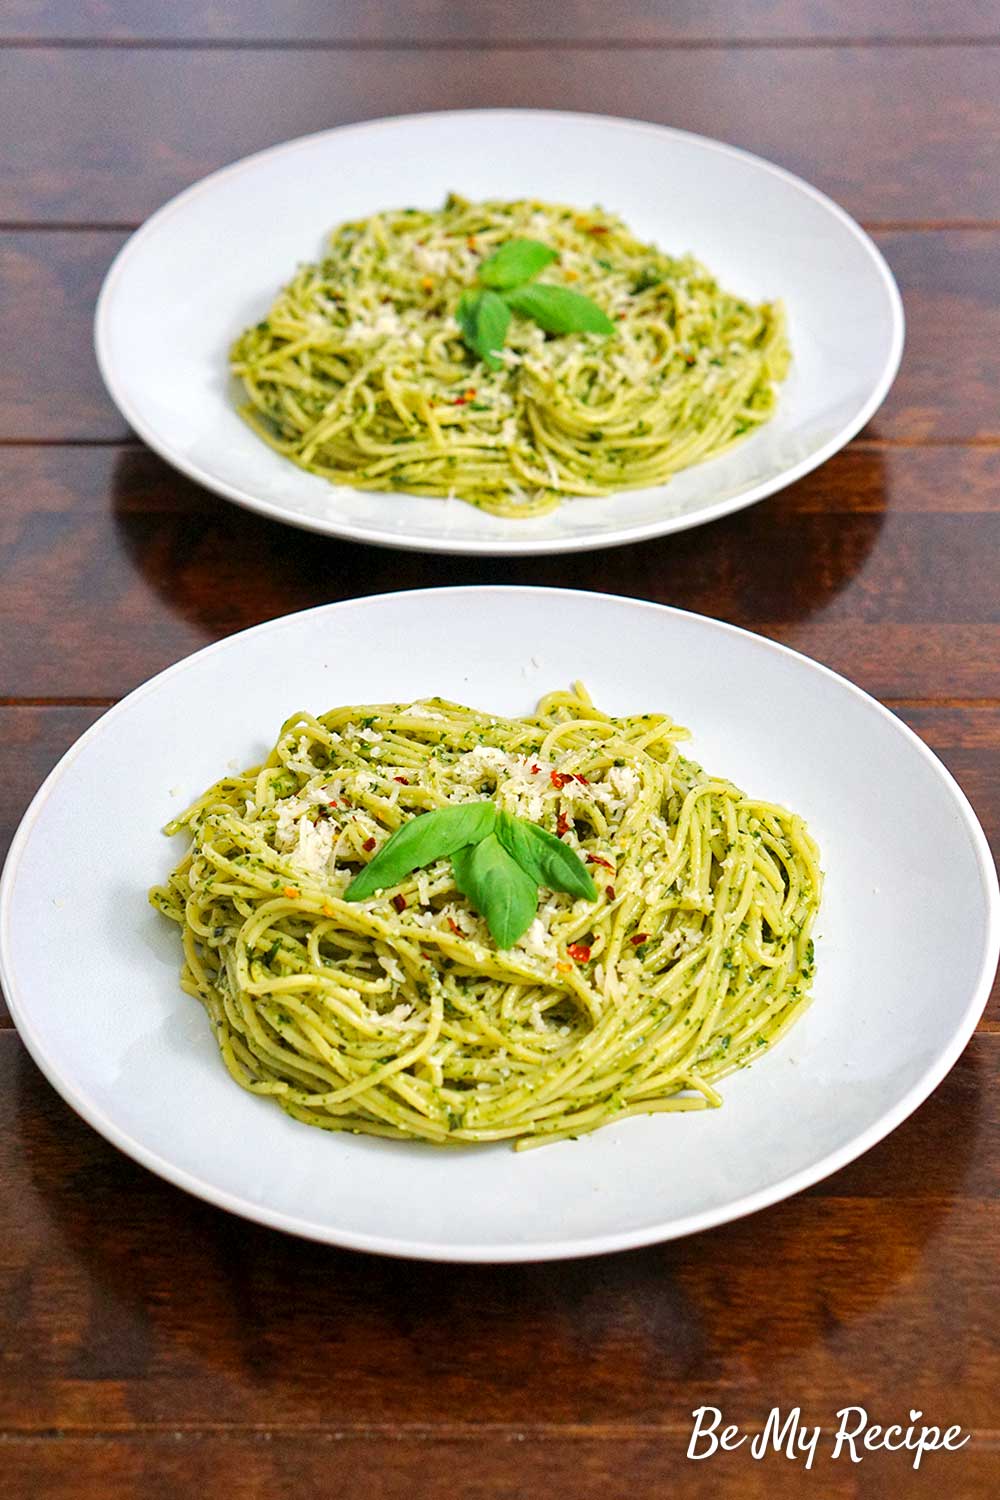 Easy 15-Minute Fresh Basil Pesto Pasta Recipe for an Italian-Inspired Lunch Loaded with Flavor